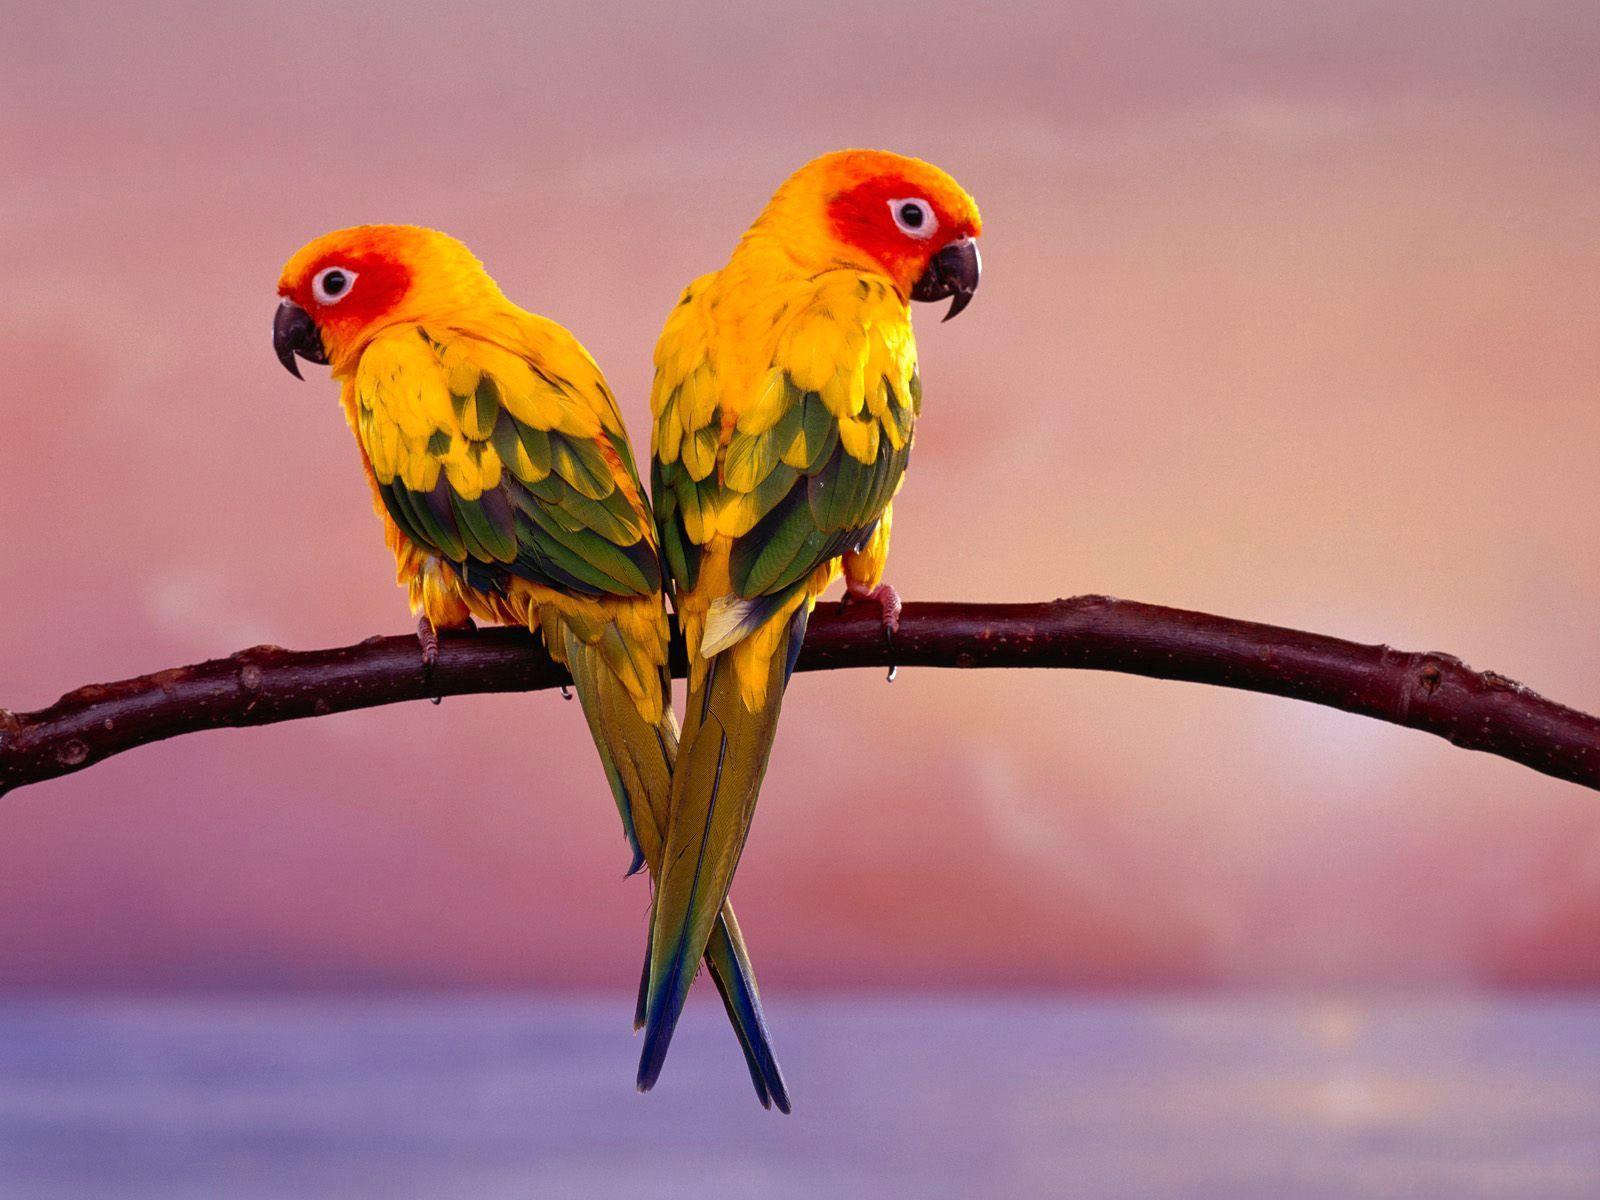 A Group Of Colorful Birds. HD Animals and Birds Wallpaper